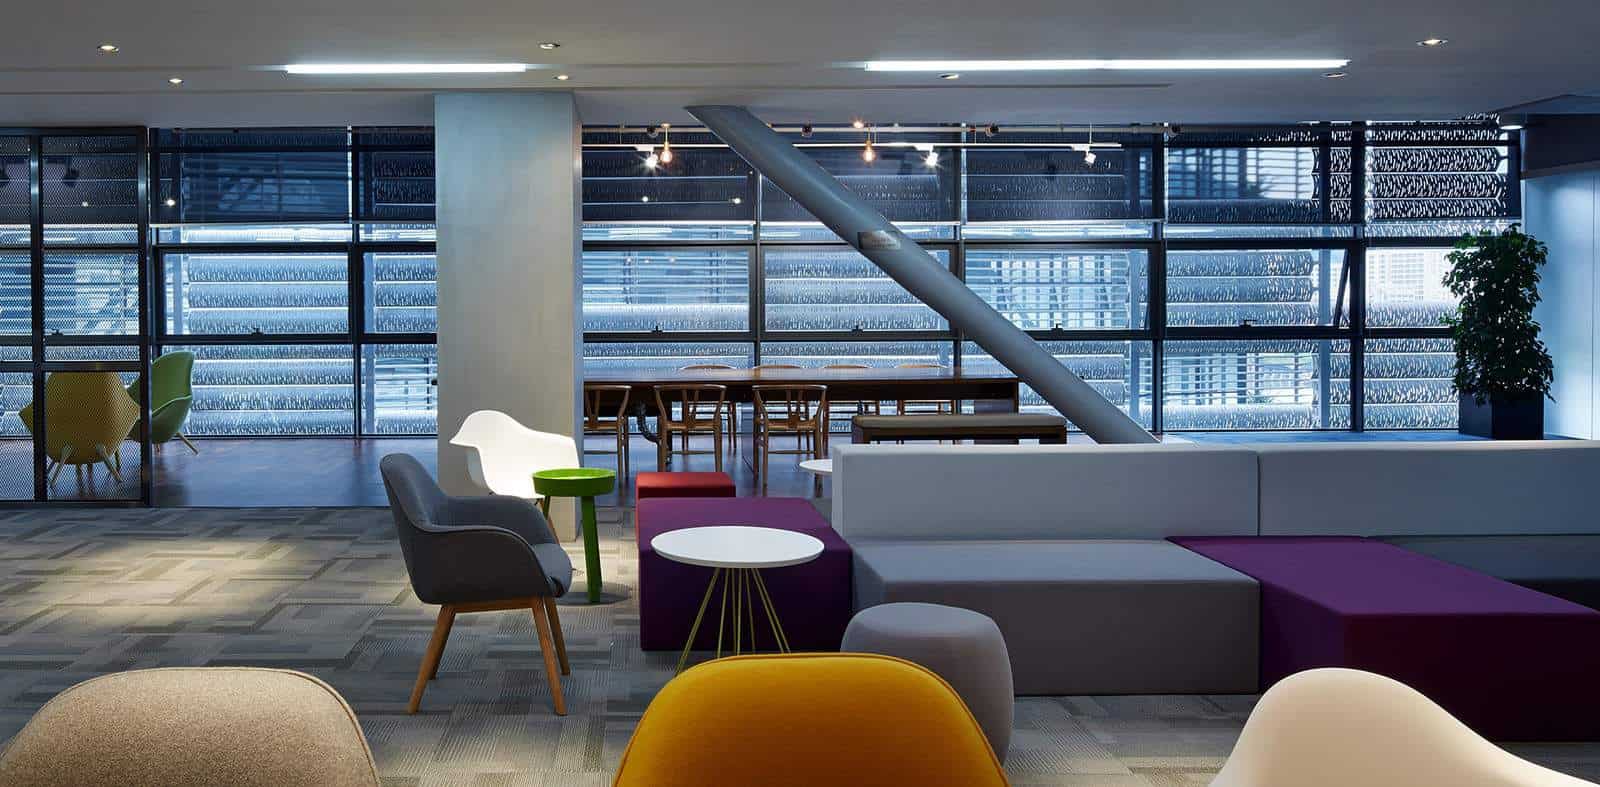 Break out area with multicoloured block seating